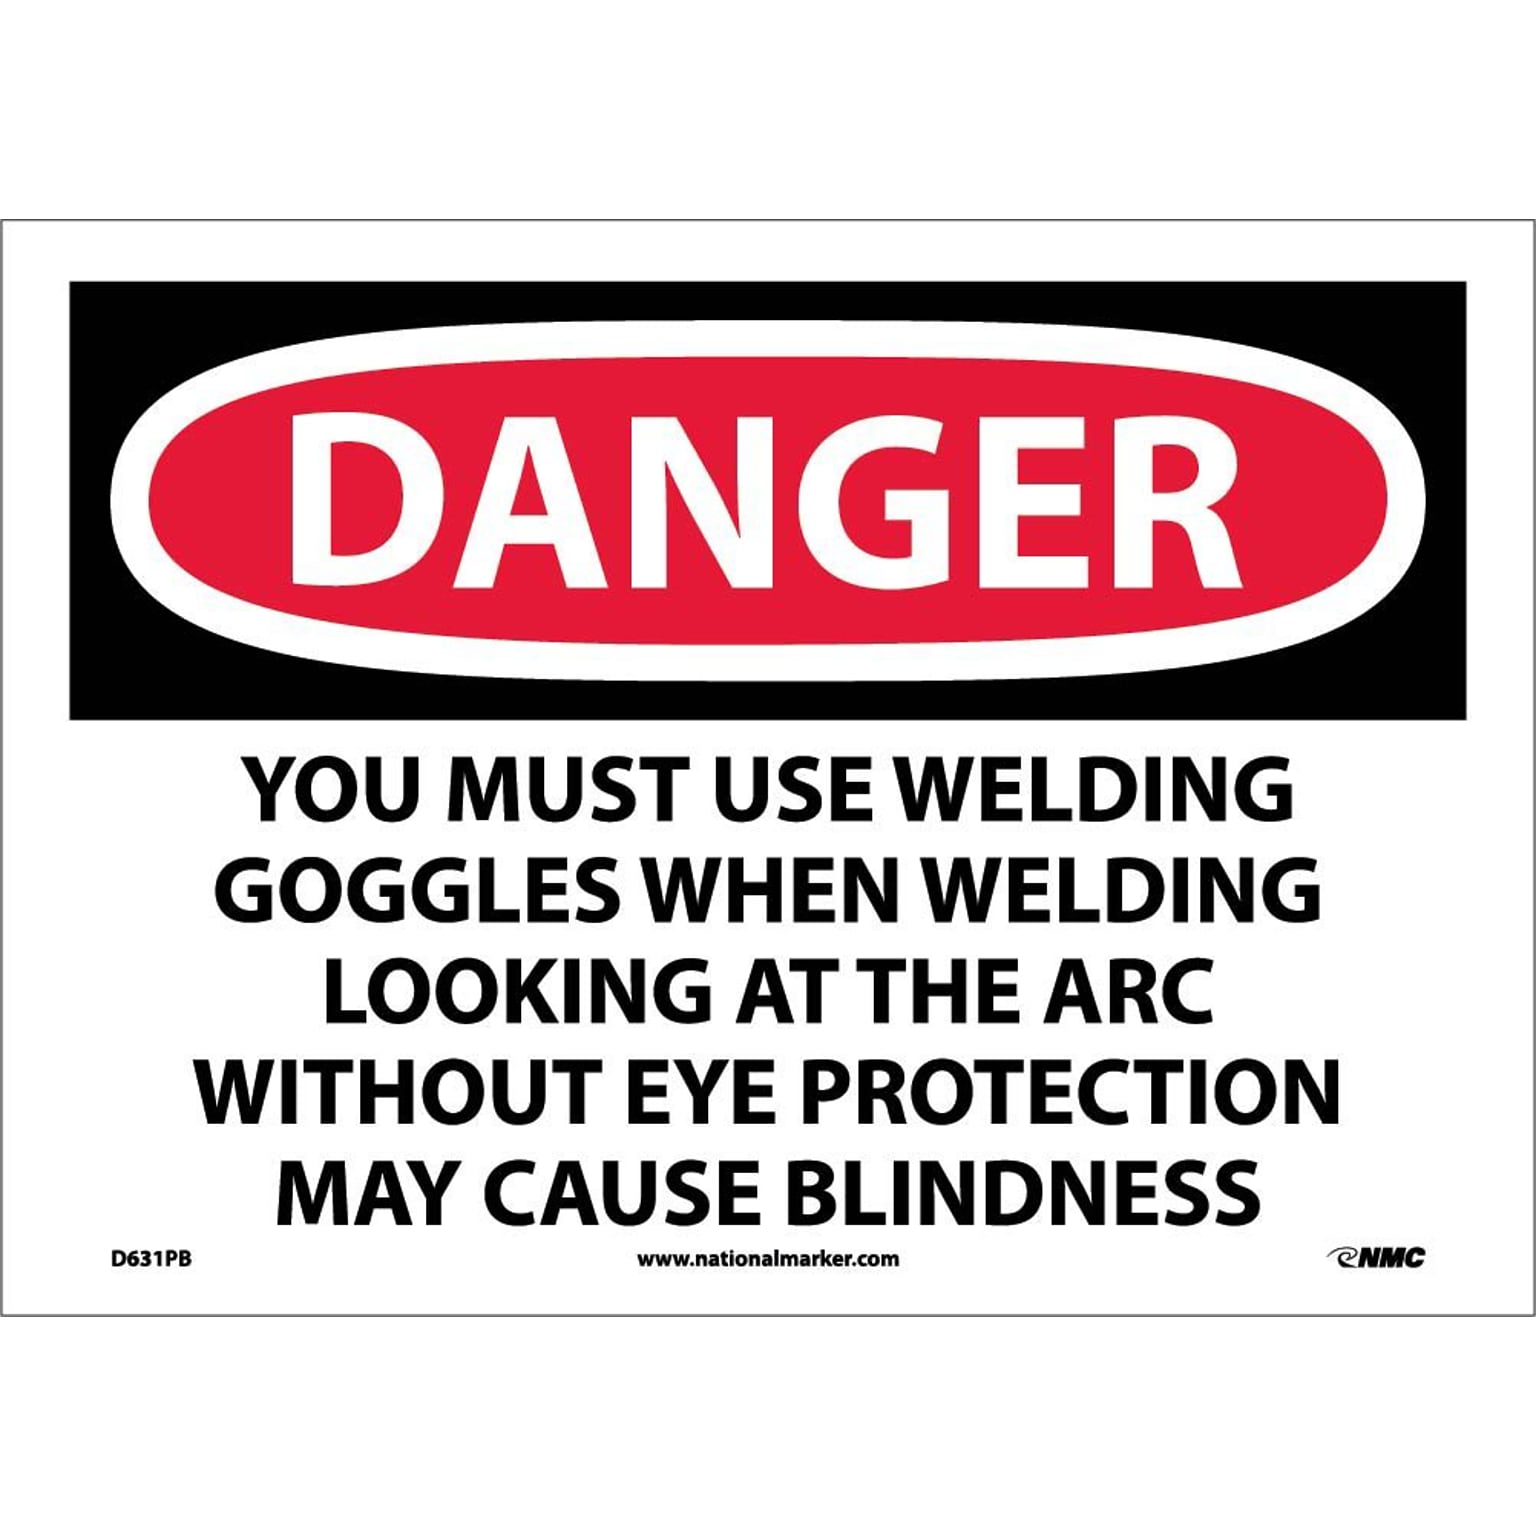 Danger Signs; You Must Use Welding Goggles When Welding Looking At The Arc Without Eye Protection  (D631PB)